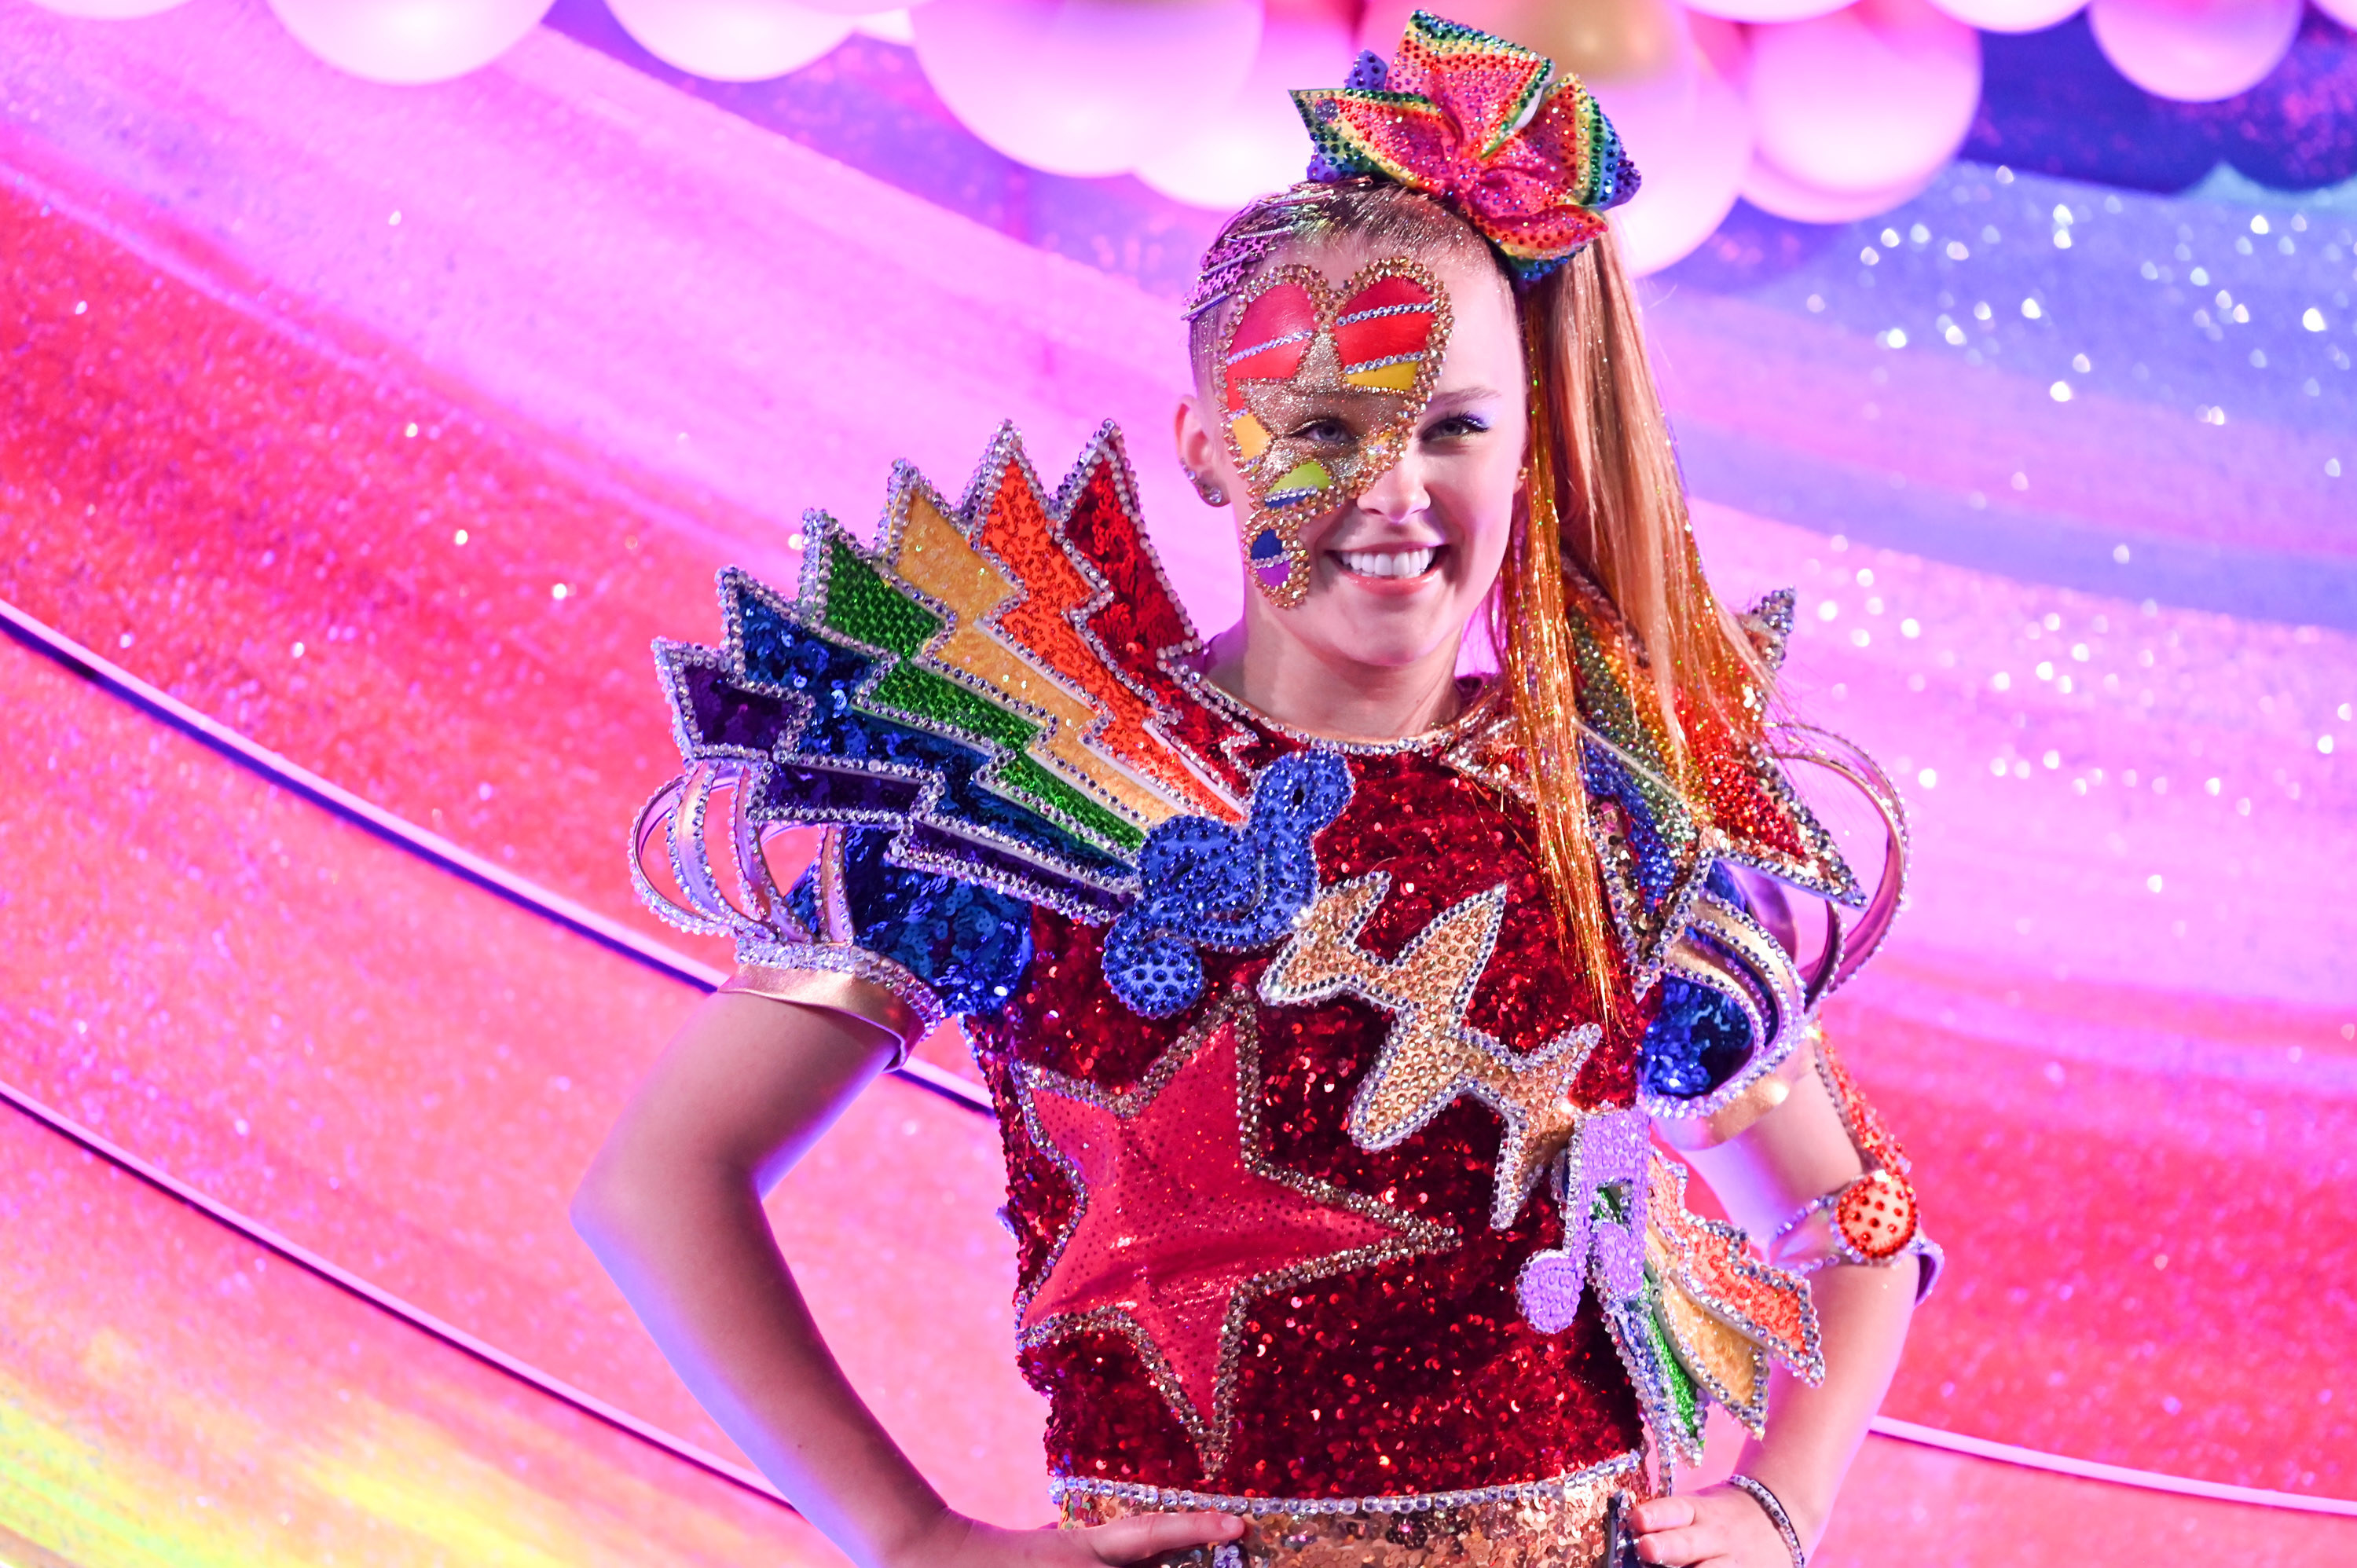 JoJo smiles while wearing a rainbow spangled outfit